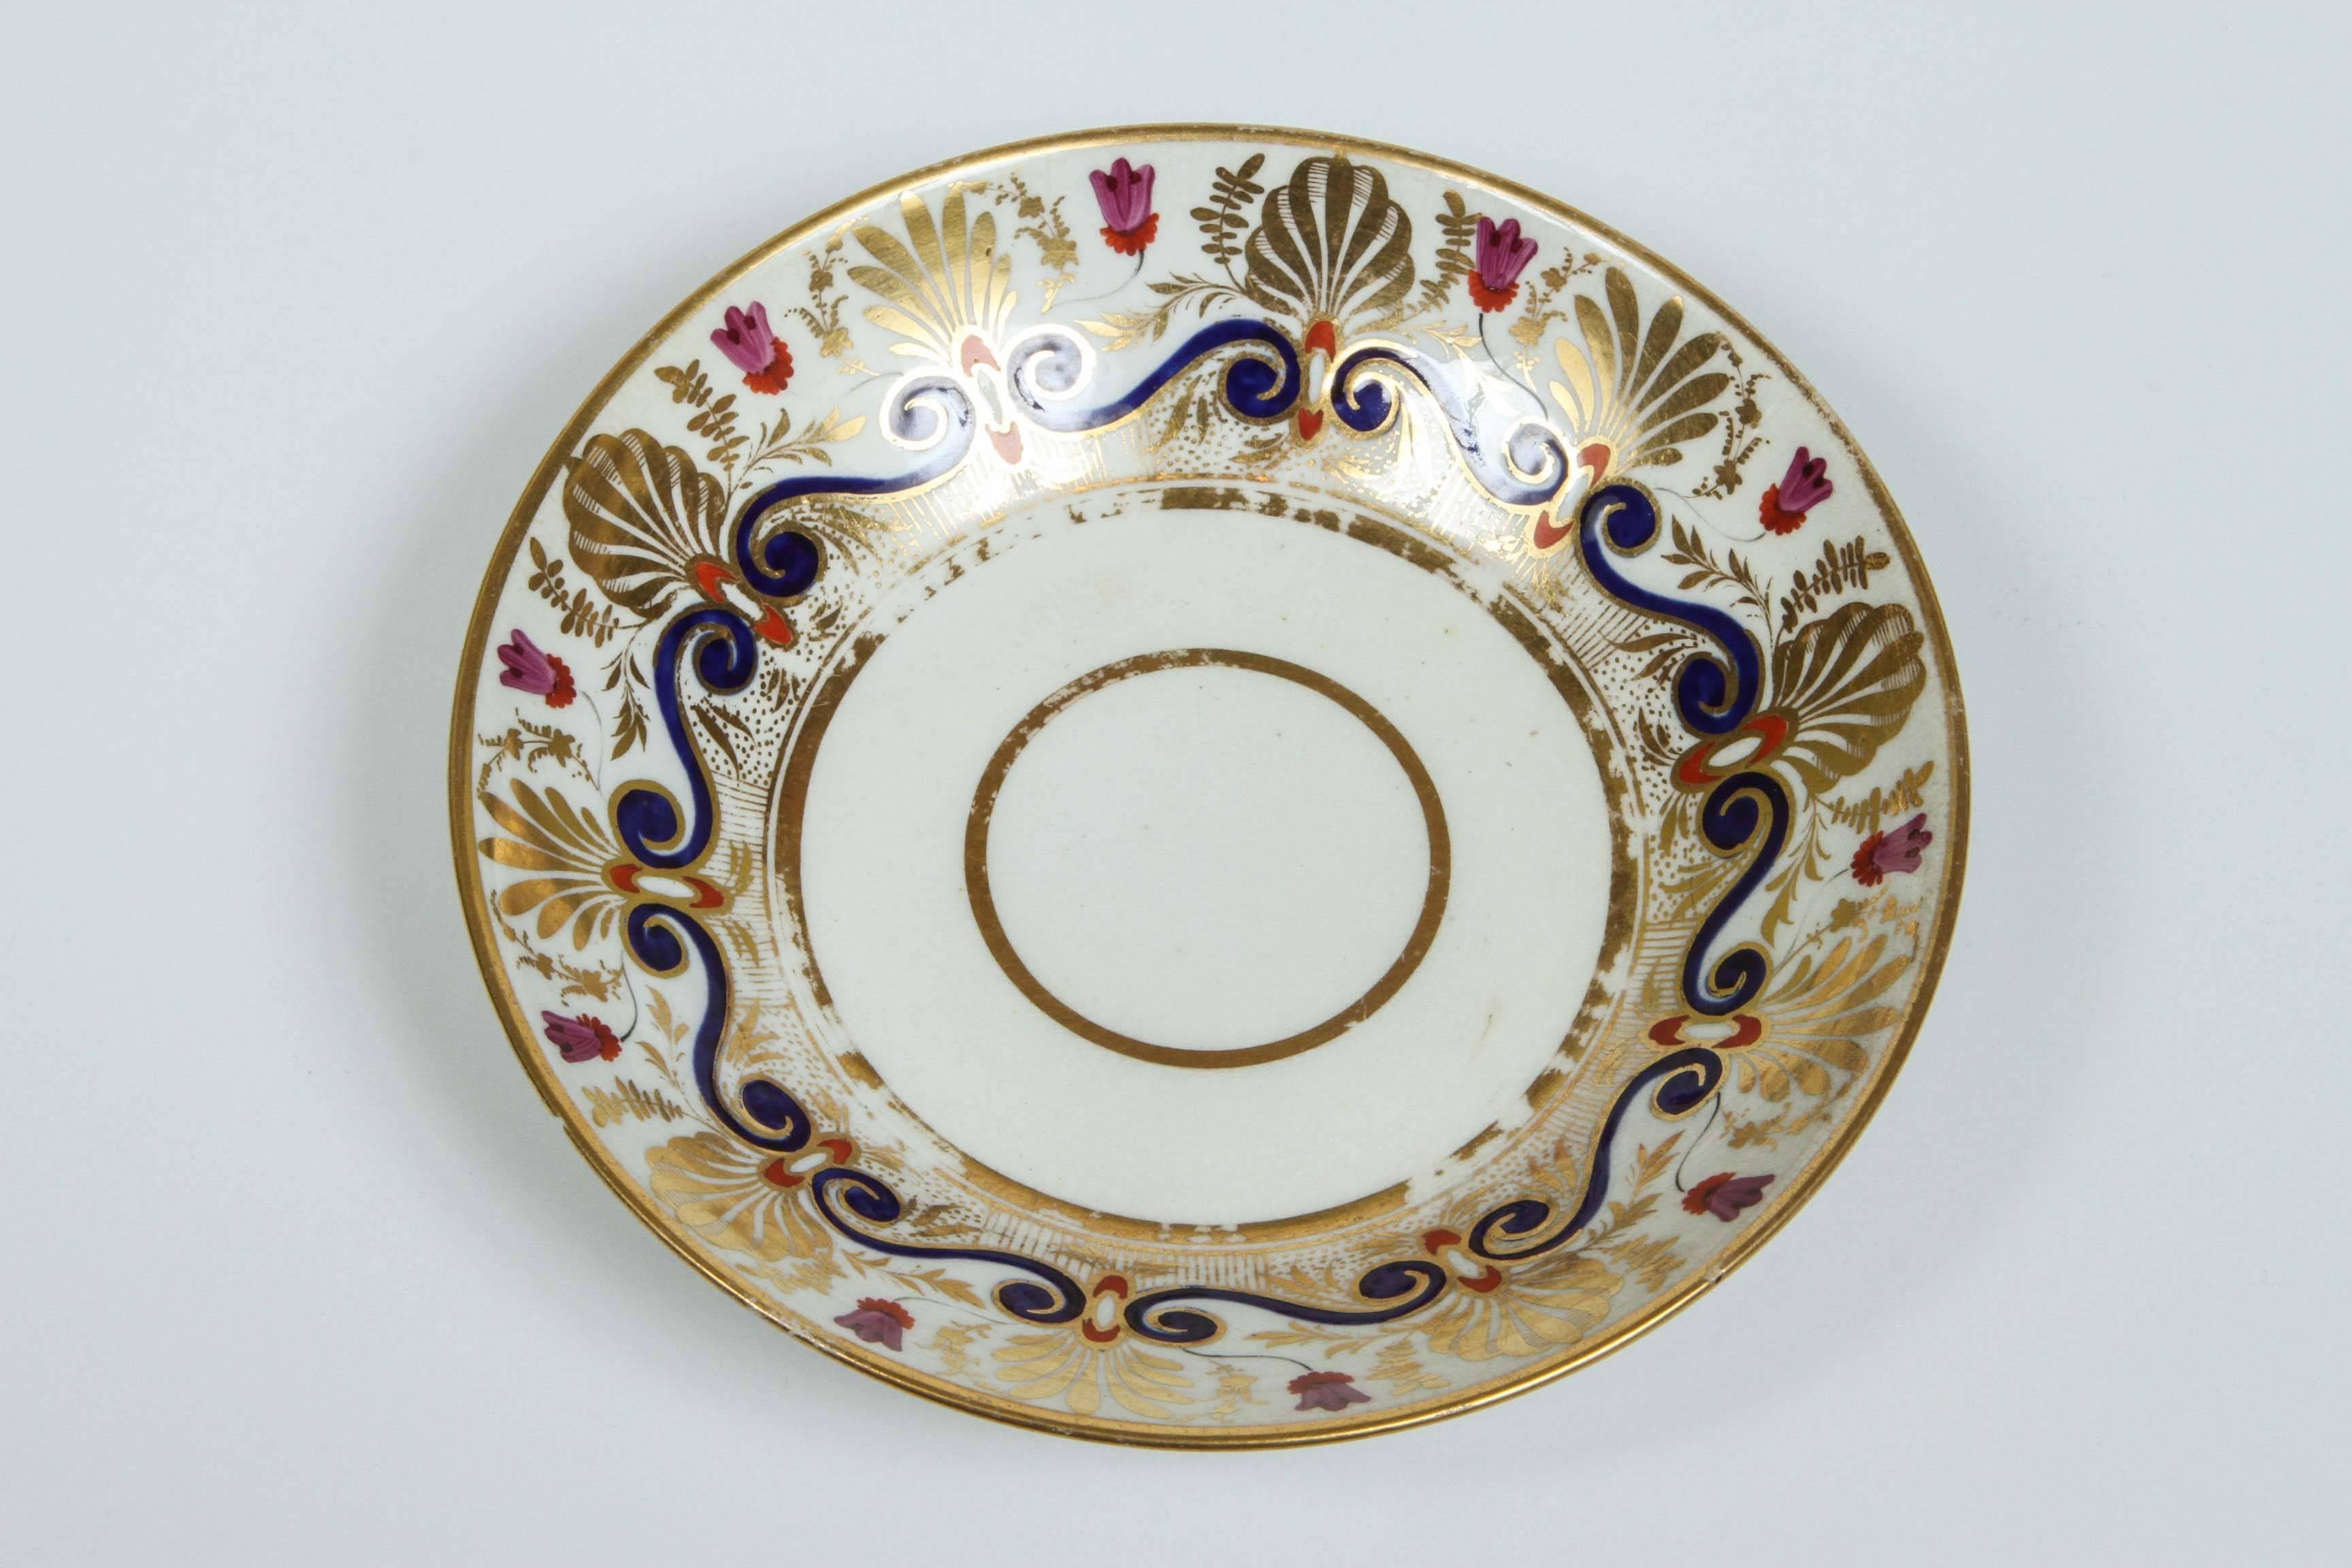 An English Derby saucer with gilt and polychrome decoration, circa 1815.